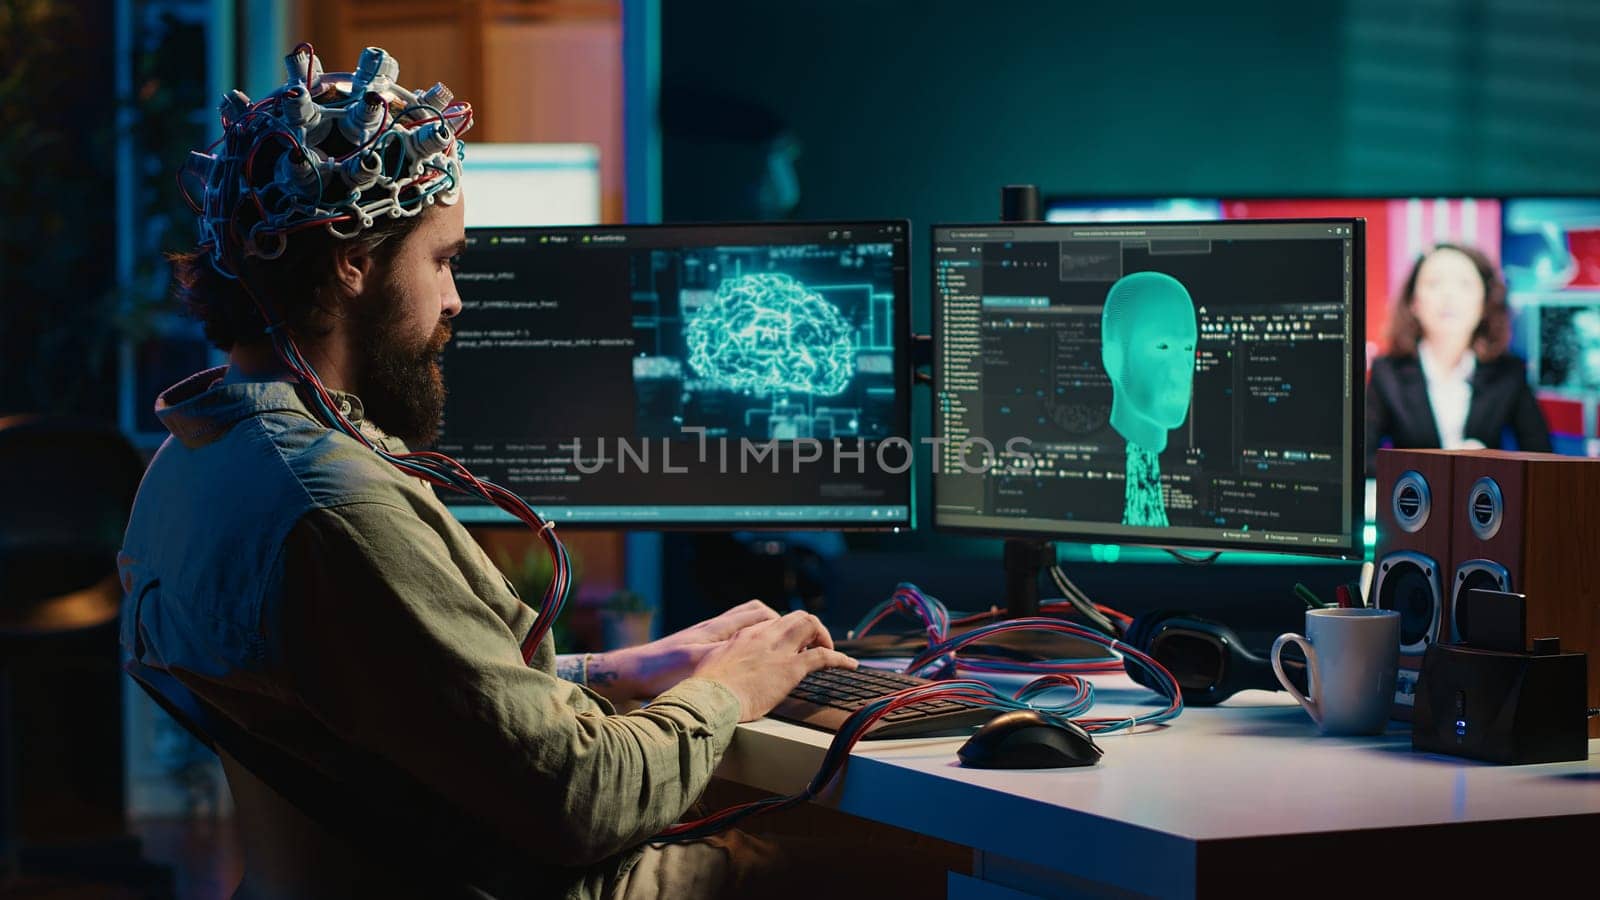 Computer engineer using EEG headset, starting mind upload process using brain machine interface. Man using neuroscientific device to transfer consciousness into cyberspace, typing code, camera A